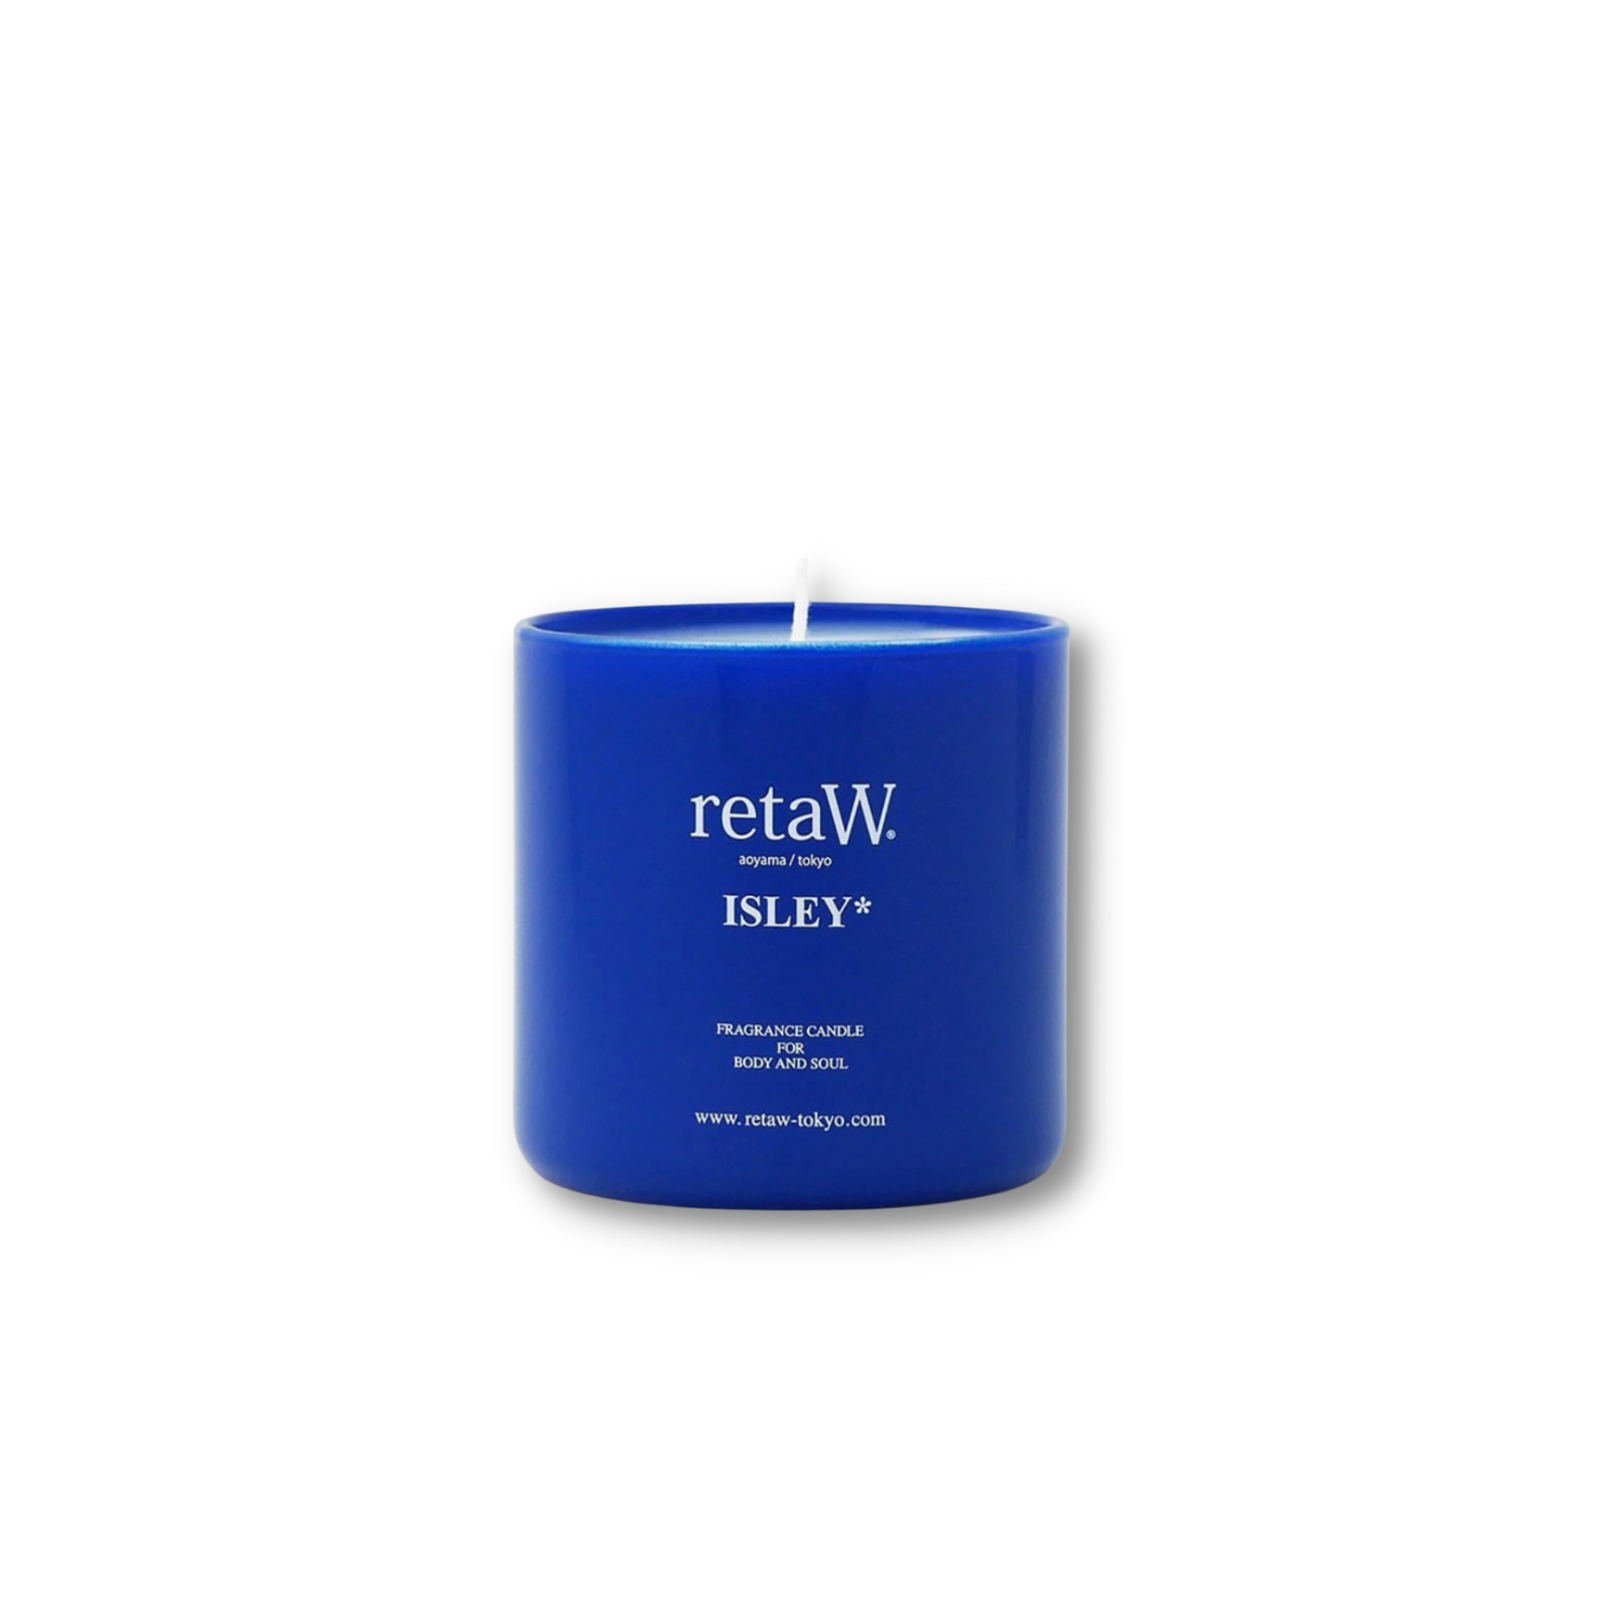 Isley Fragrance Candle, 145 g by retaW – ayọ Institute of Design +